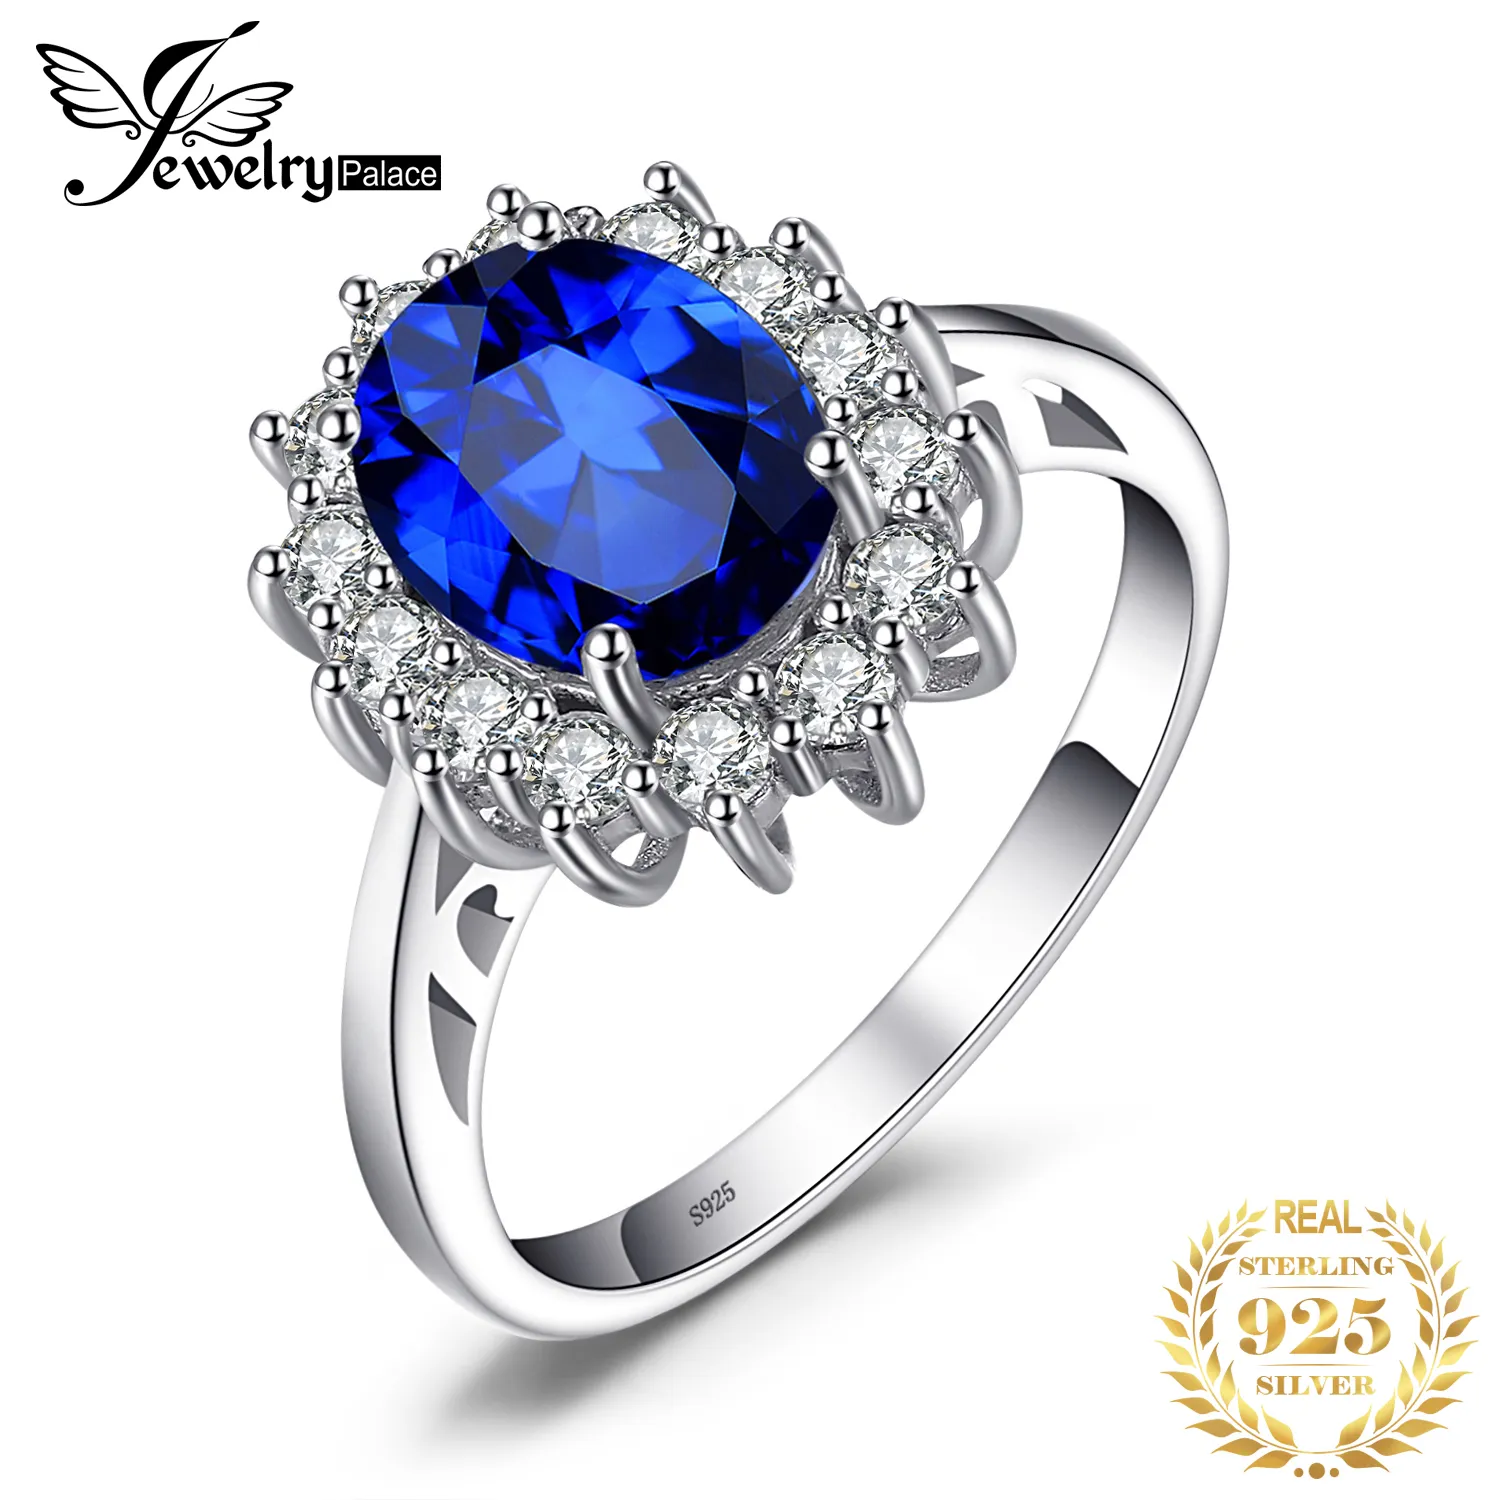 JewPalace Princess Created Sapphire Ring 925 Sterling Silver Rings for Women Engagement Ring Silver 925 Gemstones Jewelry 2010065358160